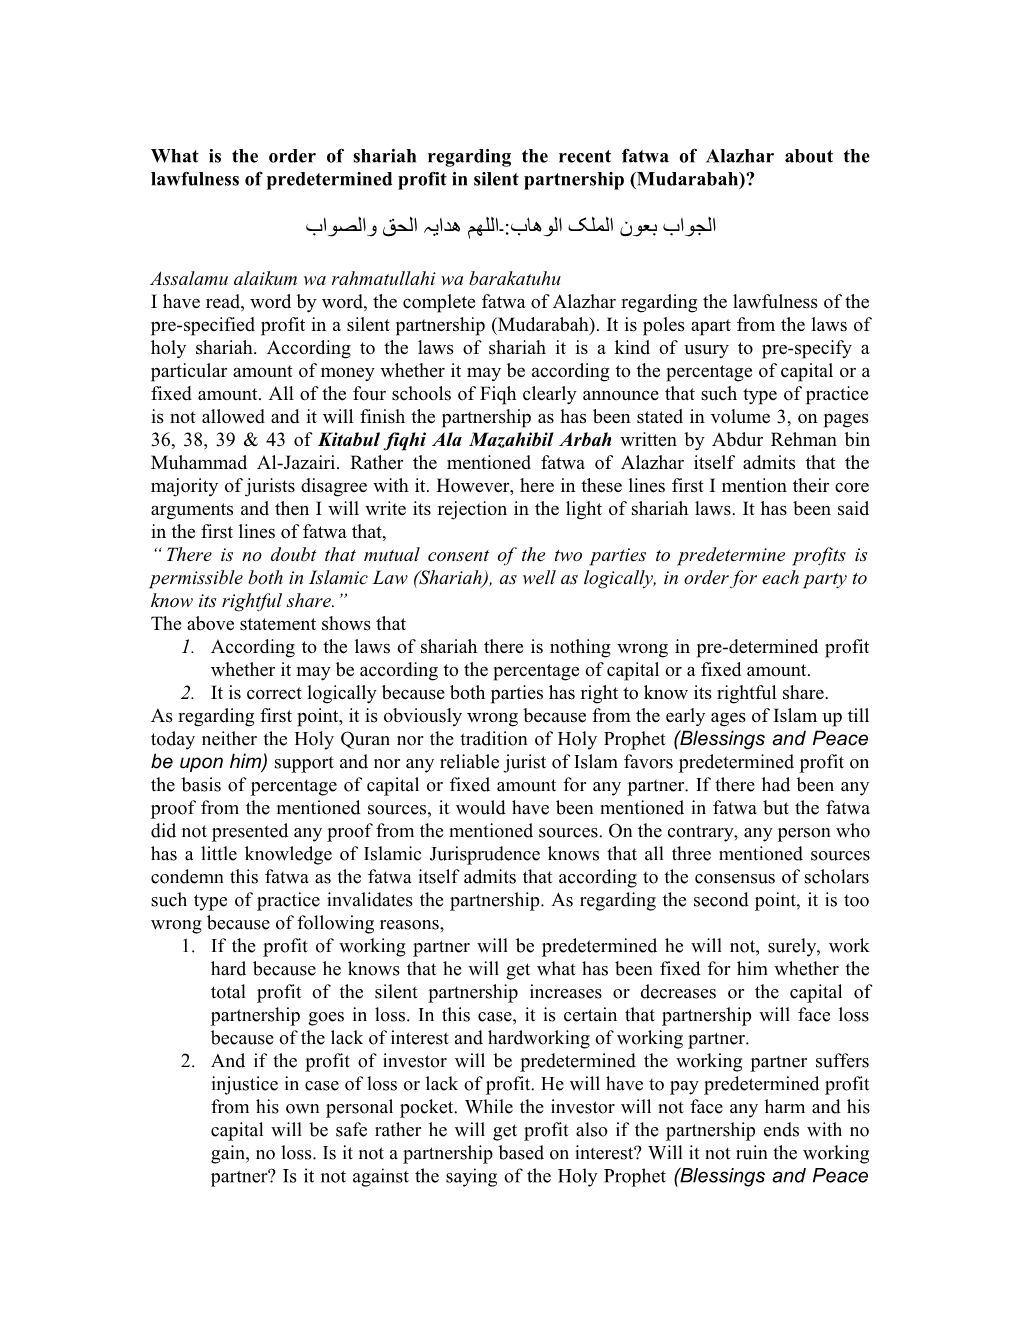 What Is the Order of Shariah Regarding the Recent Fatwa of Alazhar About the Lawfulness